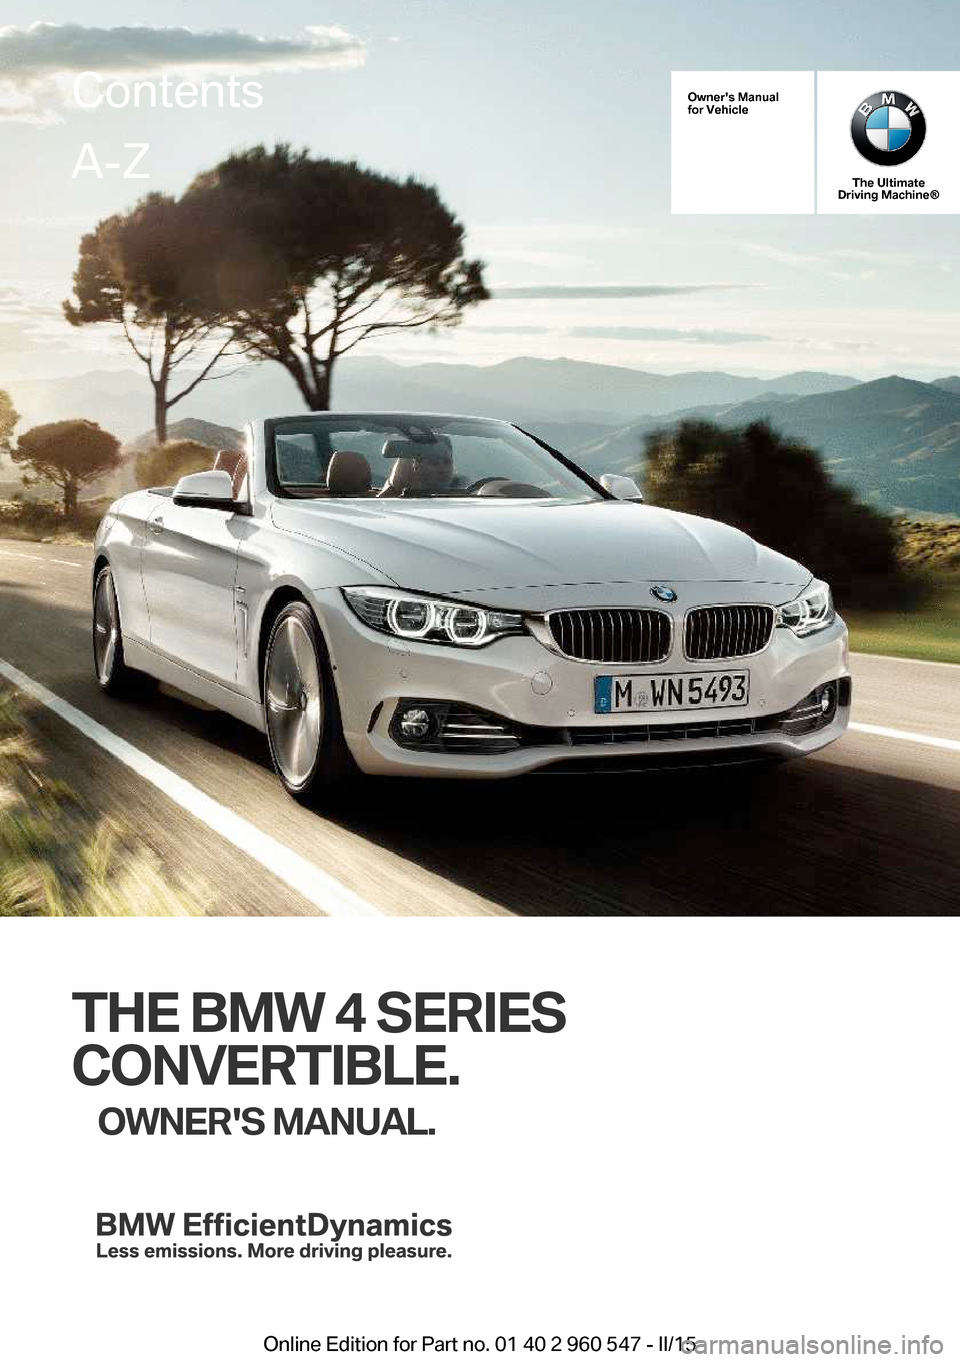 BMW 4 SERIES CONVERTIBLE 2016 F33 Owners Manual Owners Manual
for Vehicle
The Ultimate
Driving Machine®
THE BMW 4 SERIES
CONVERTIBLE. OWNERS MANUAL.
ContentsA-Z
Online Edition for Part no. 01 40 2 960 547 - II/15   